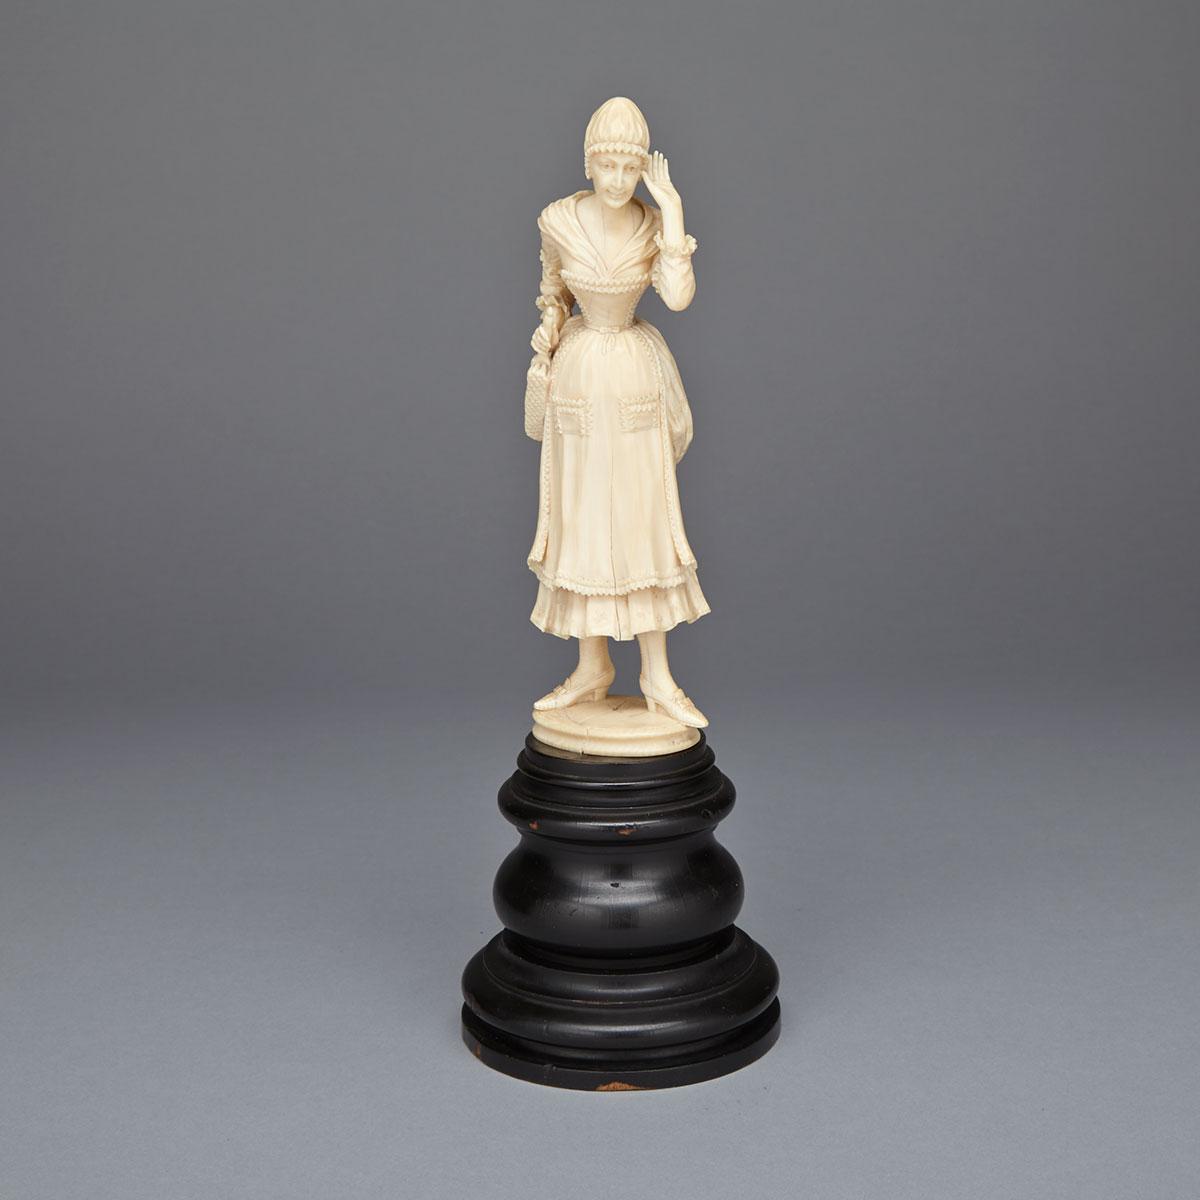 Dieppe Carved Ivory Figure of an Eavesdropping Charwoman, 19th century